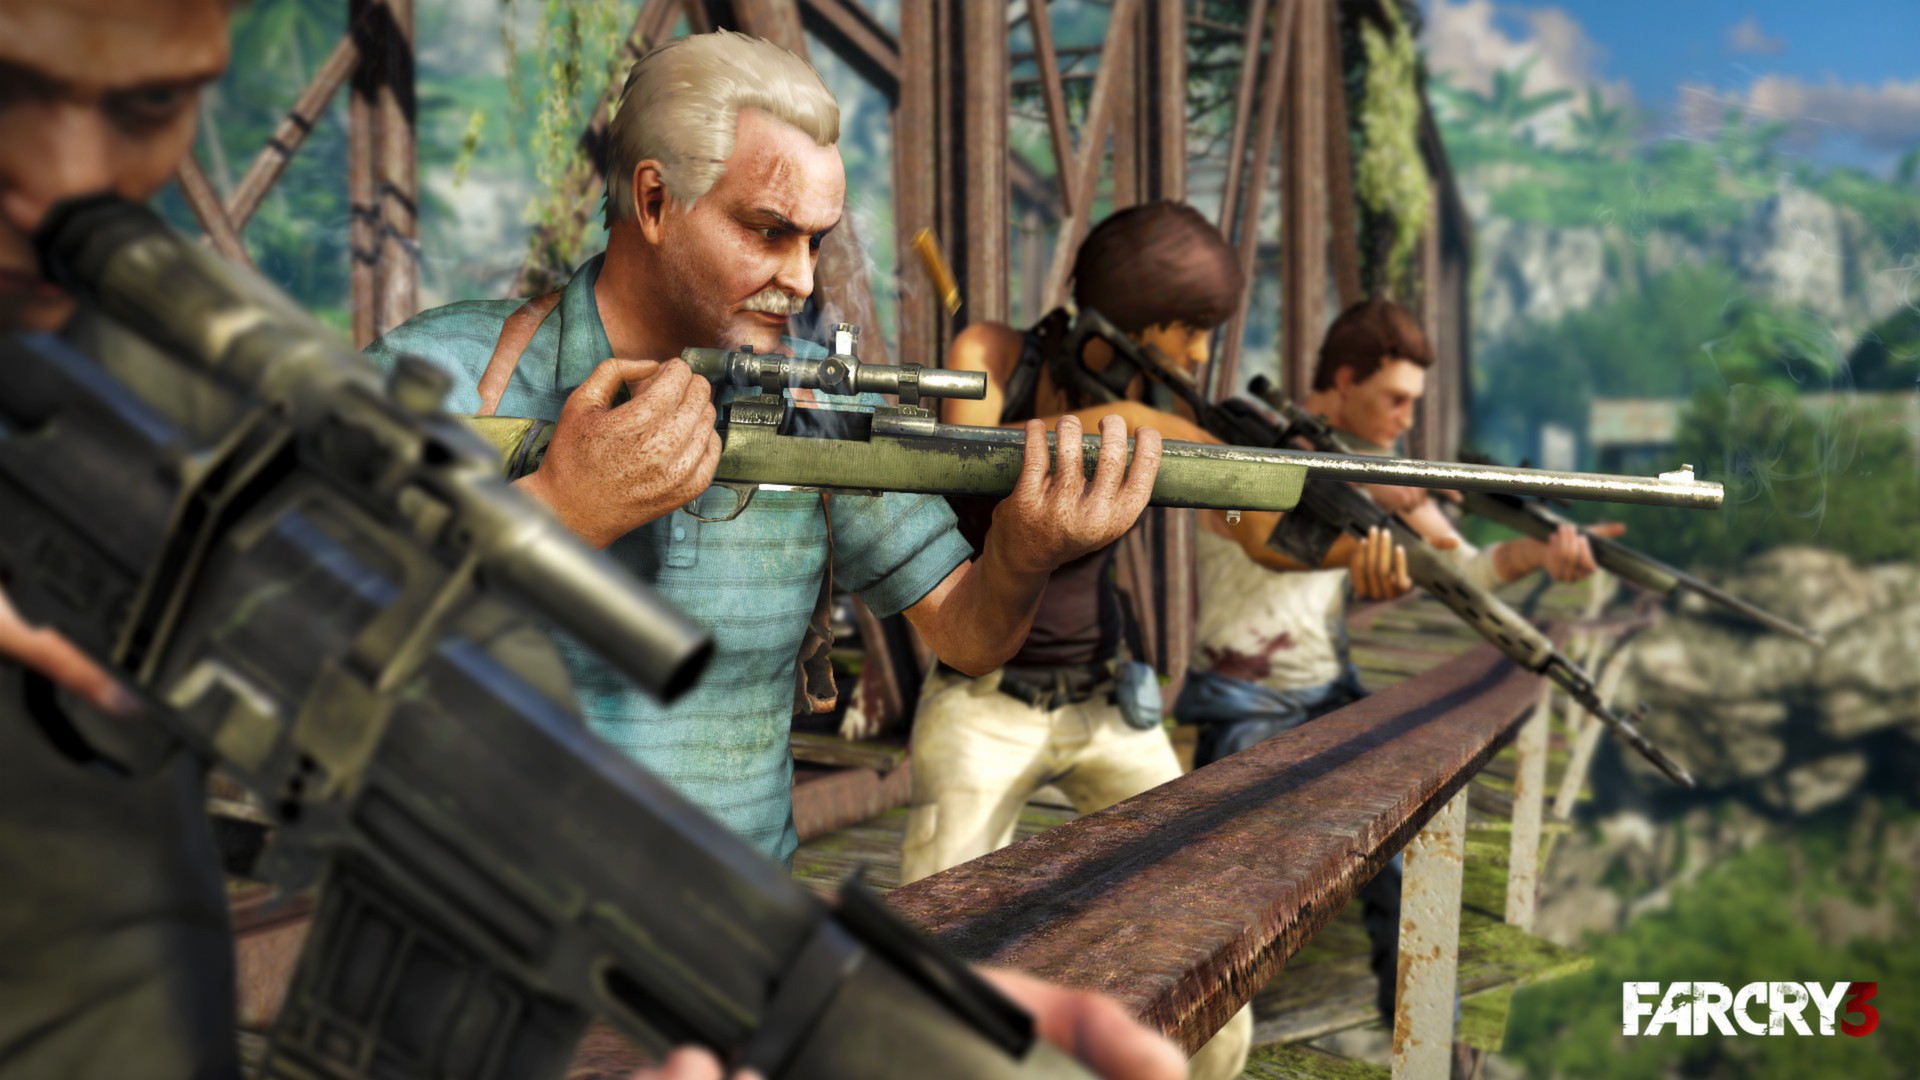 Download Far Cry 3 Complete Collection para pc via torrent